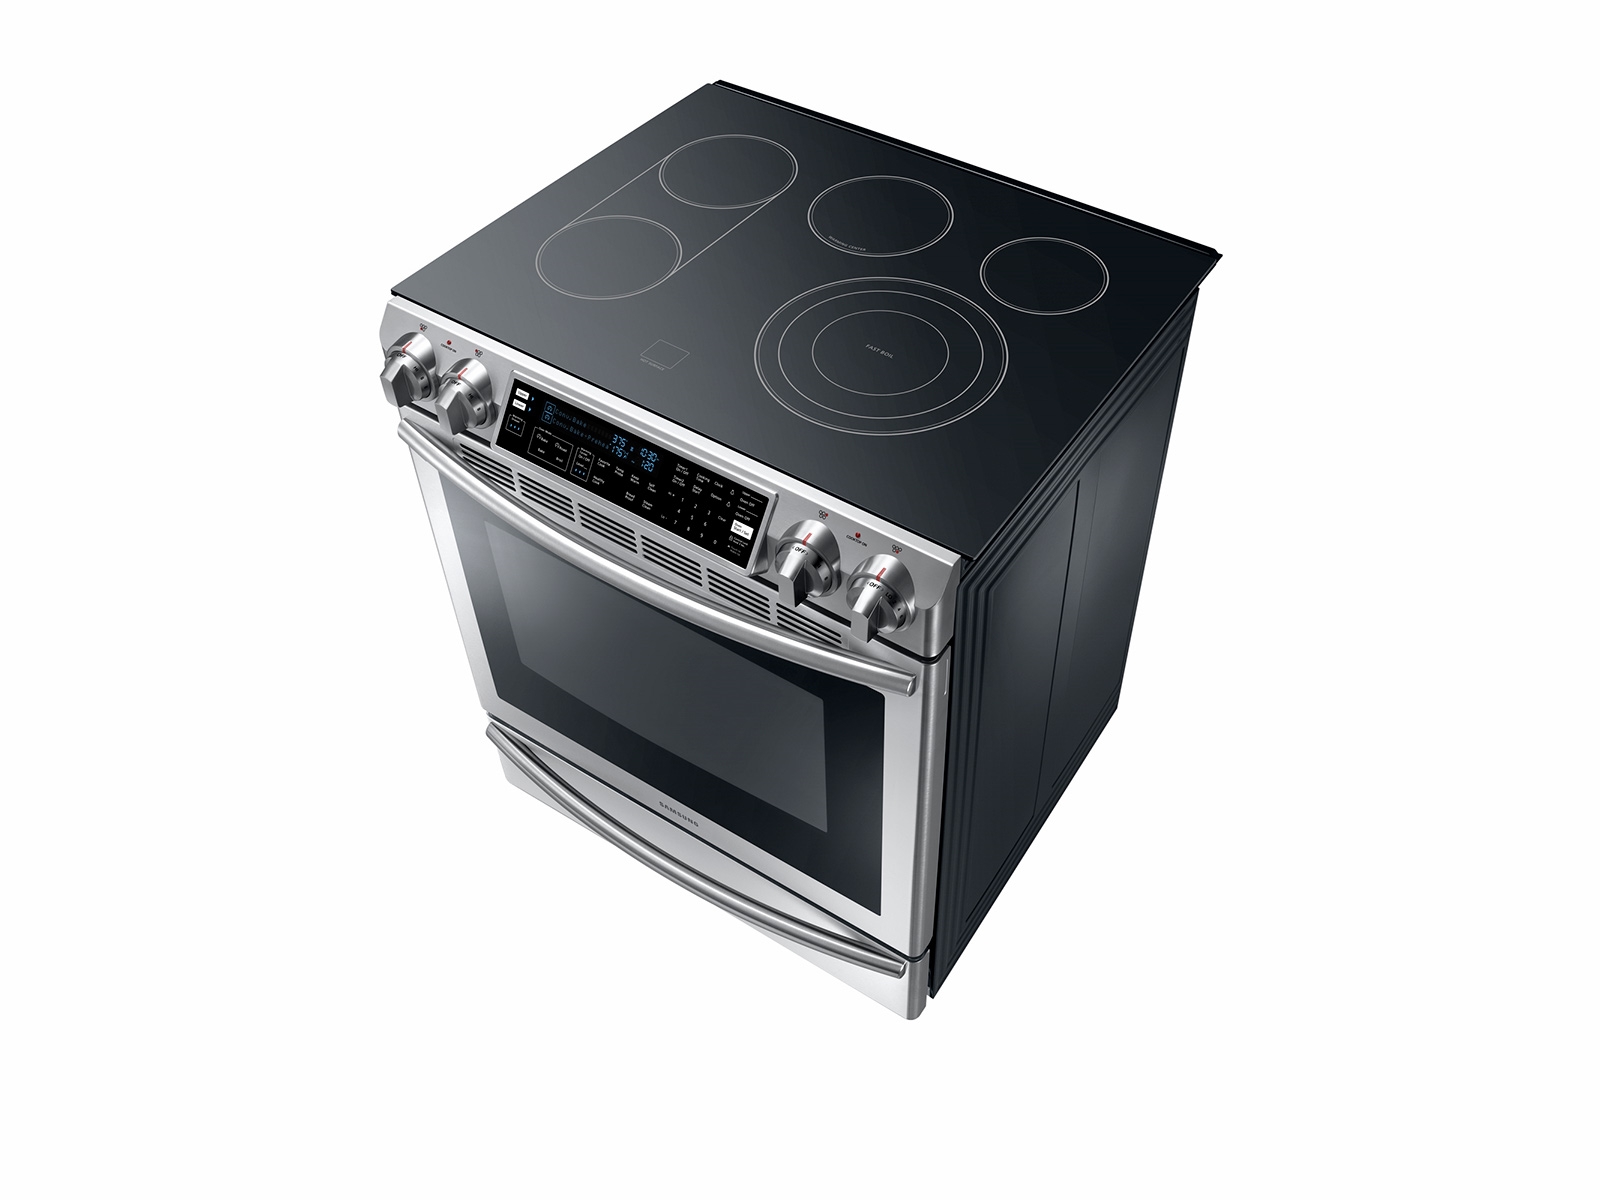 NE58K9500SG by Samsung - 5.8 cu. ft. Slide-in Electric Range with Dual  Convection in Black Stainless Steel